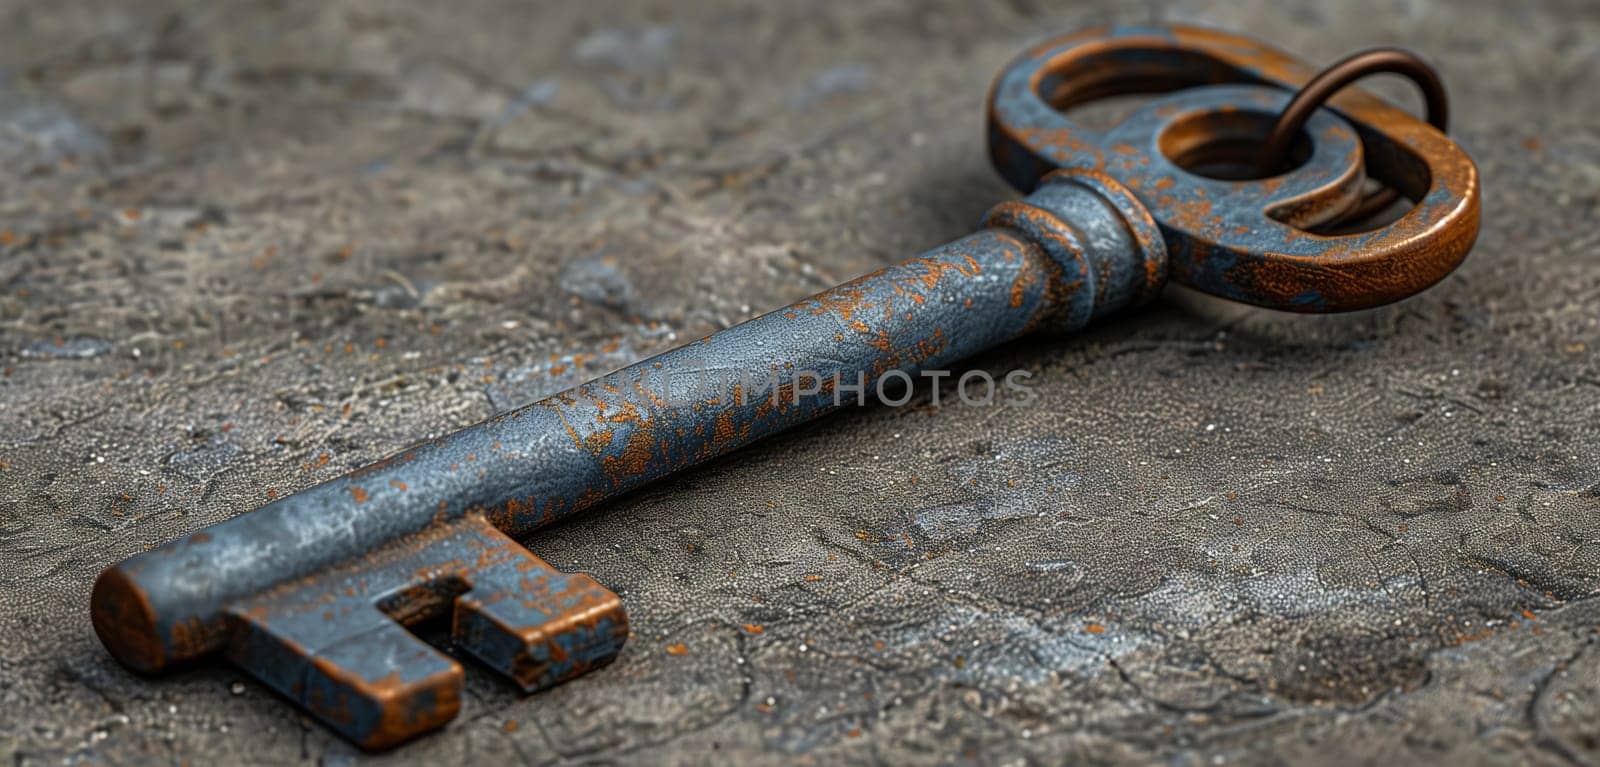 An old rusty key made of steel is lying on the ground, surrounded by wood, gas, auto parts, composite materials, nickel, pipes, and other household hardware